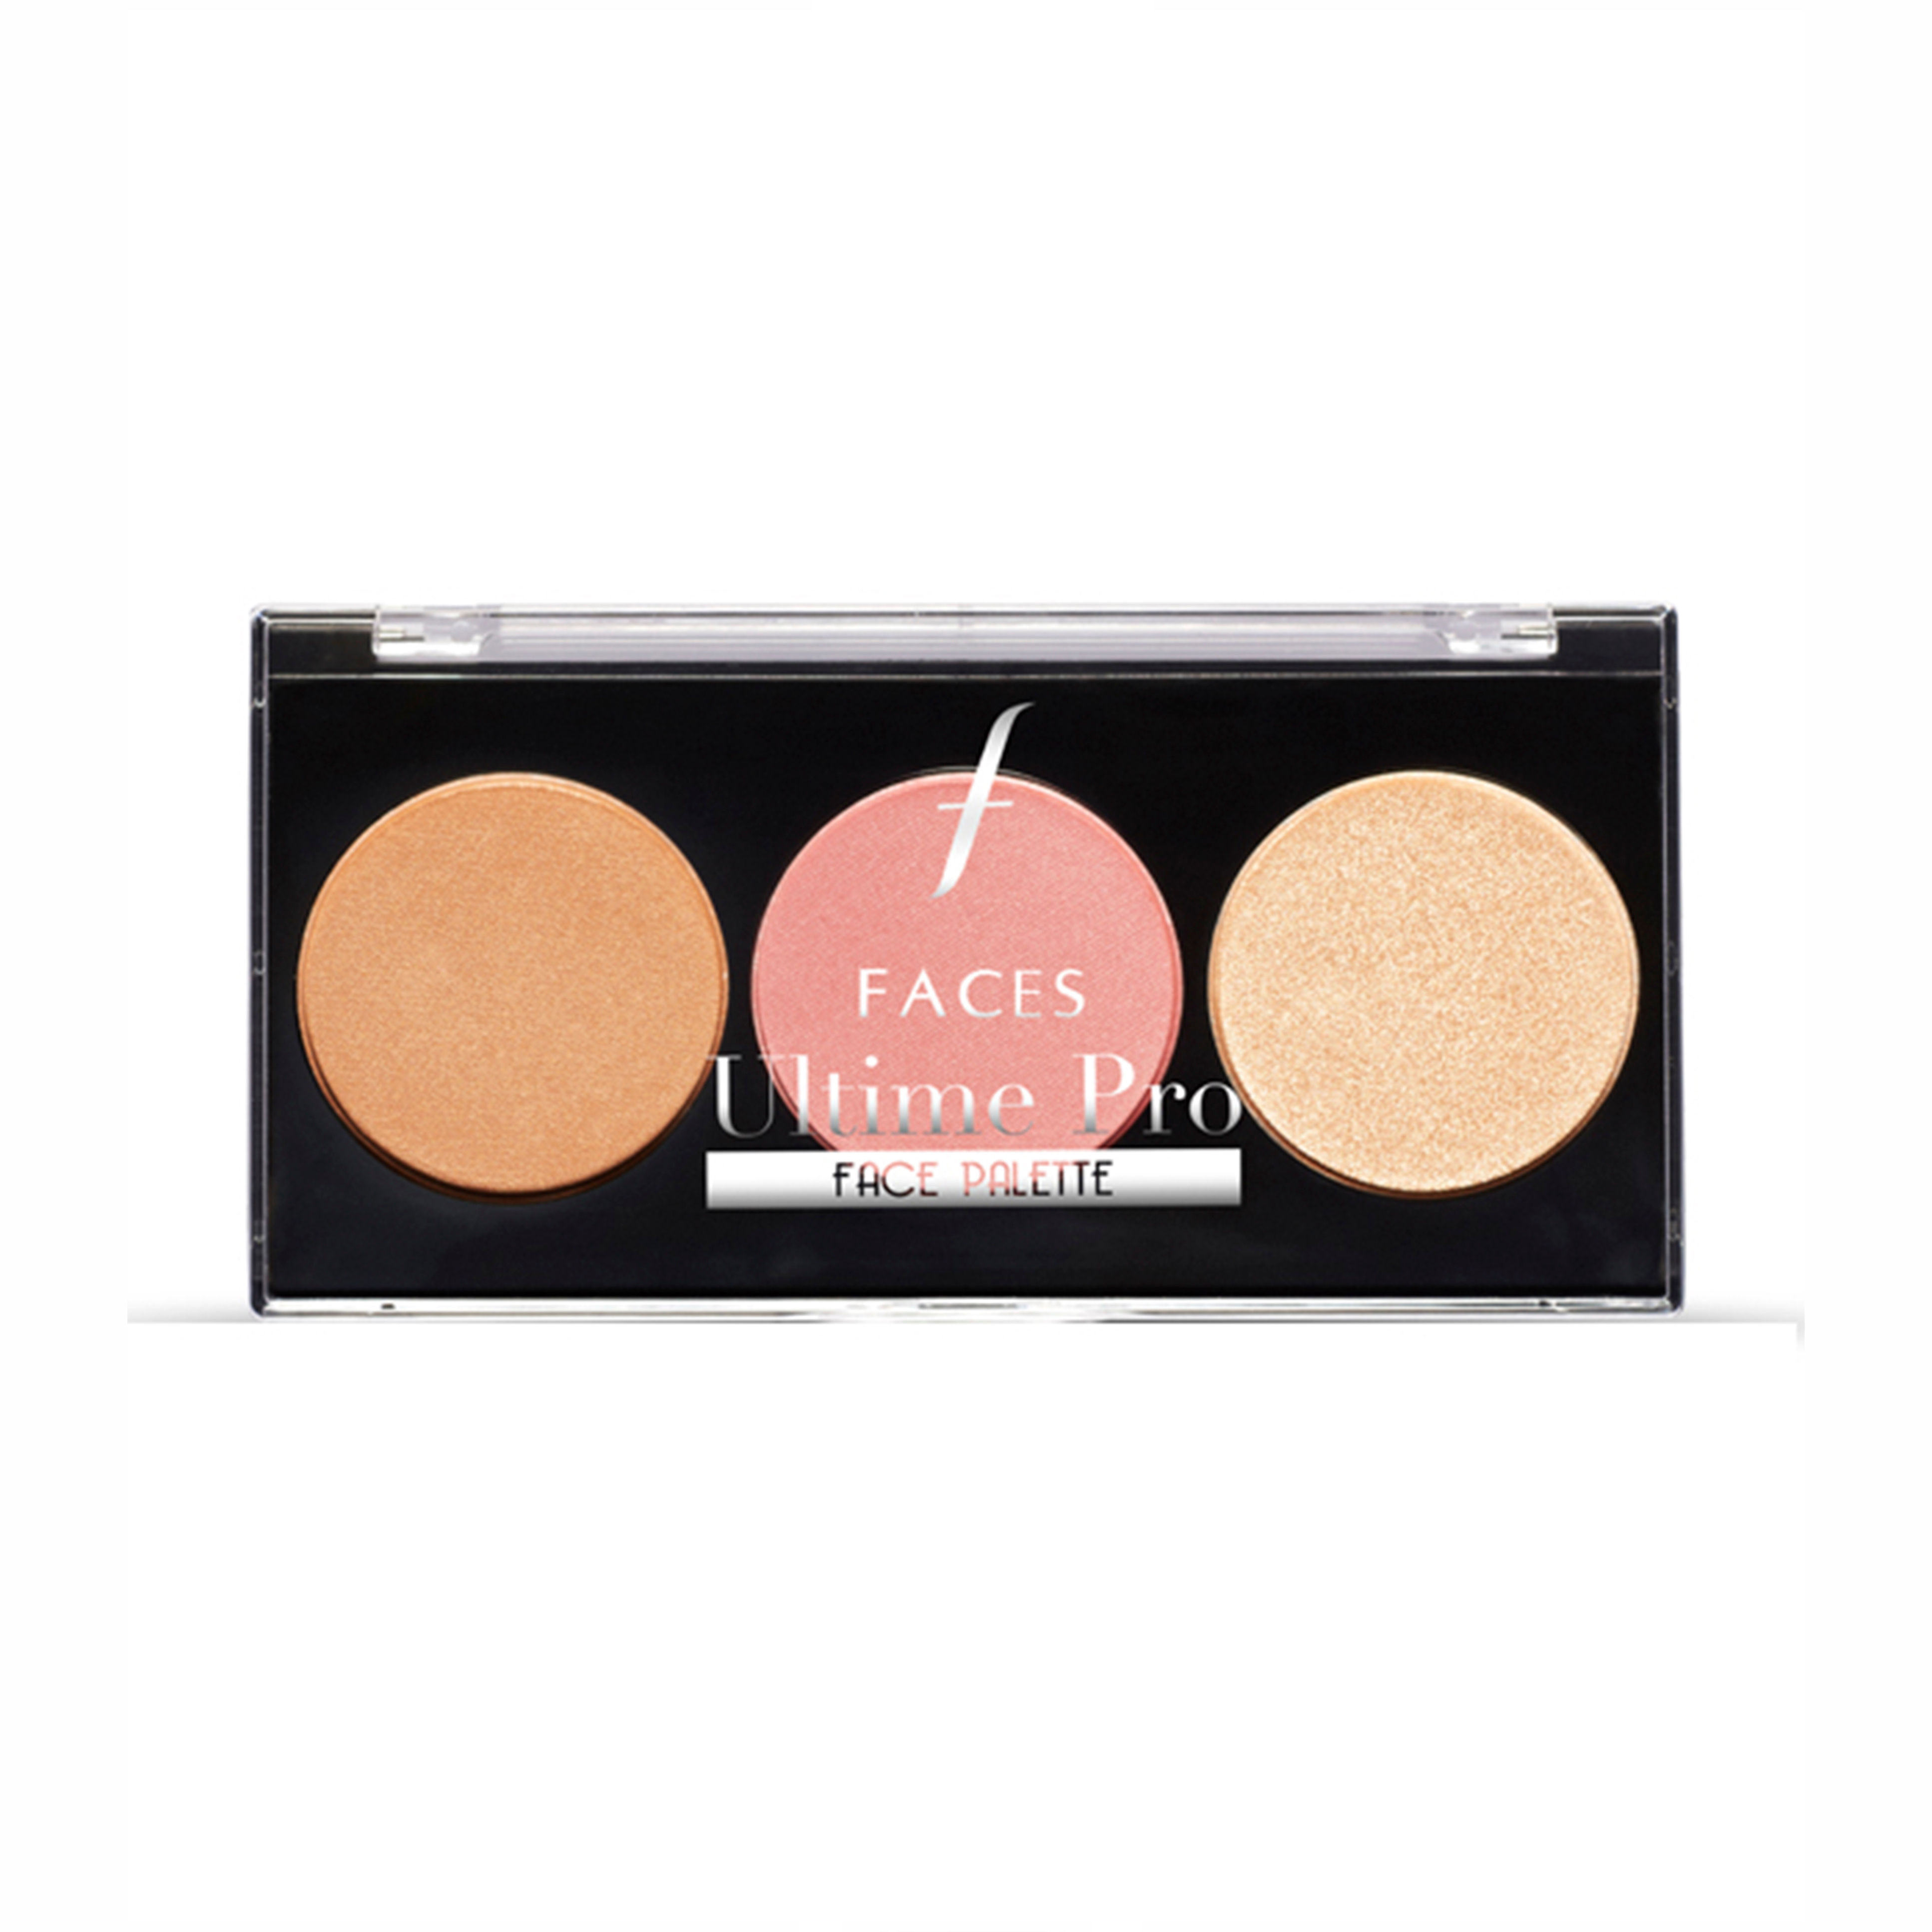 Faces Canada Ultime Pro Face Palette 3 In 1 - Fresh